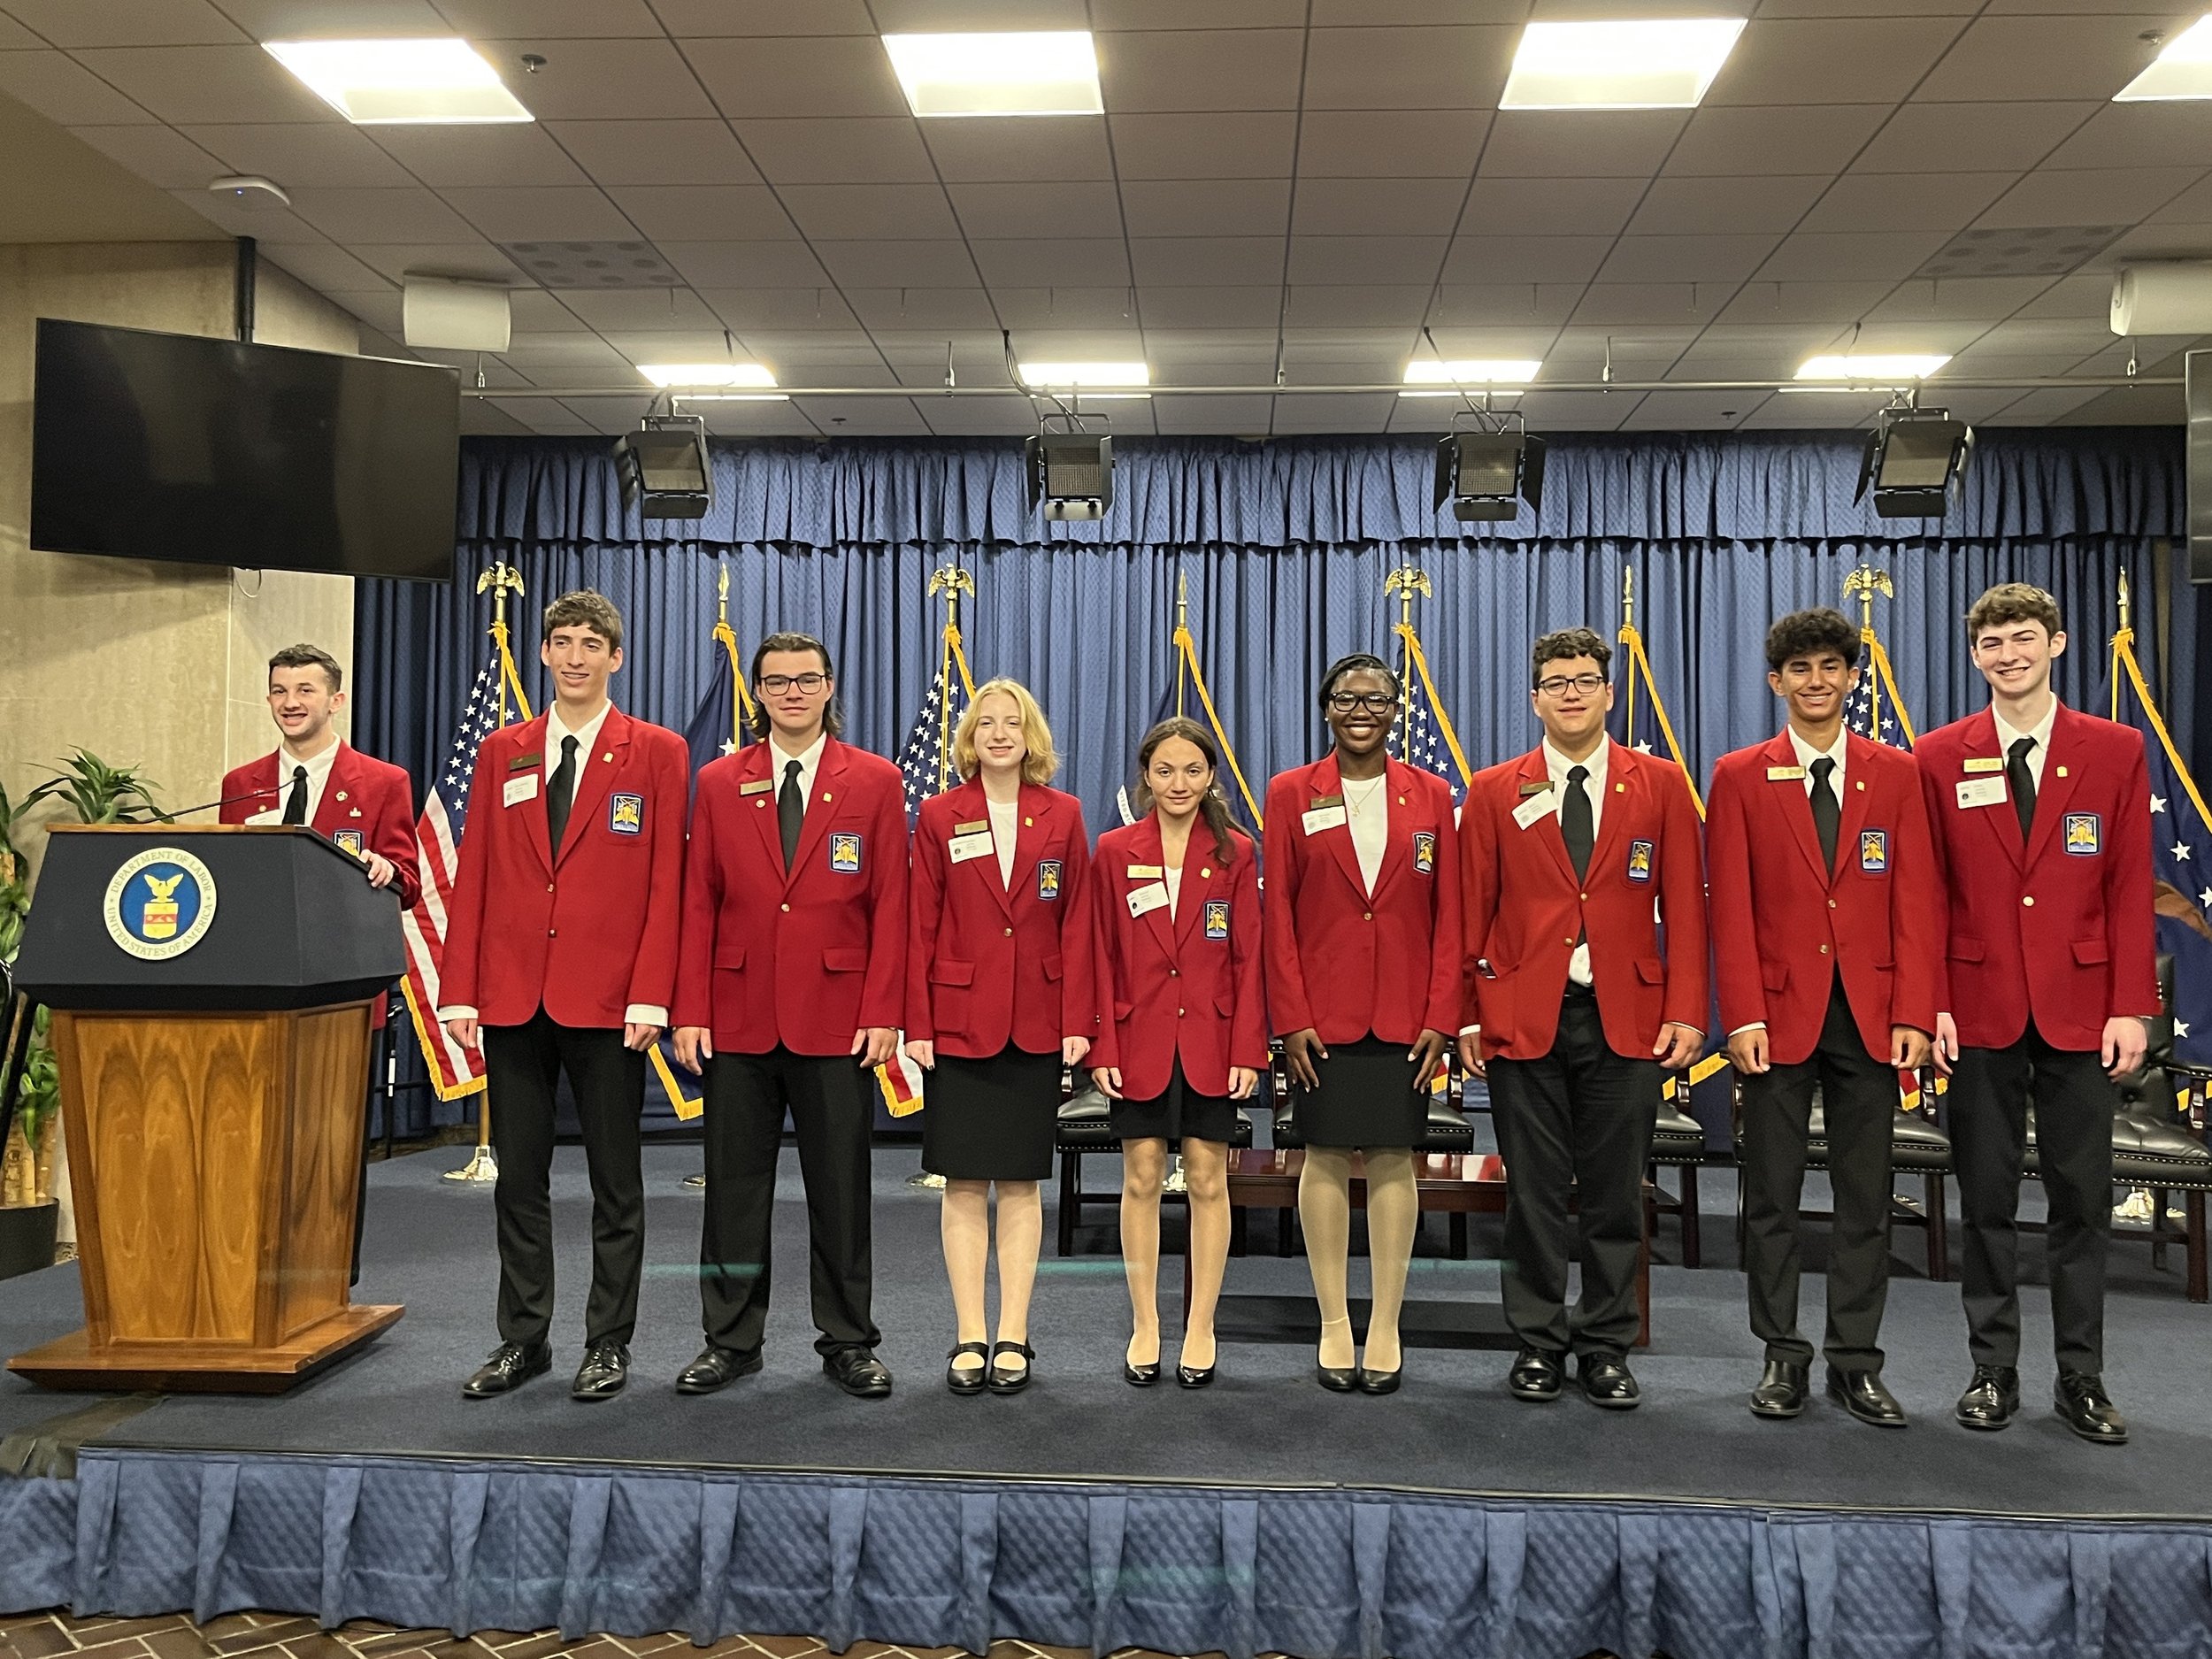 MA SkillsUSA Officers at the Department of Labor